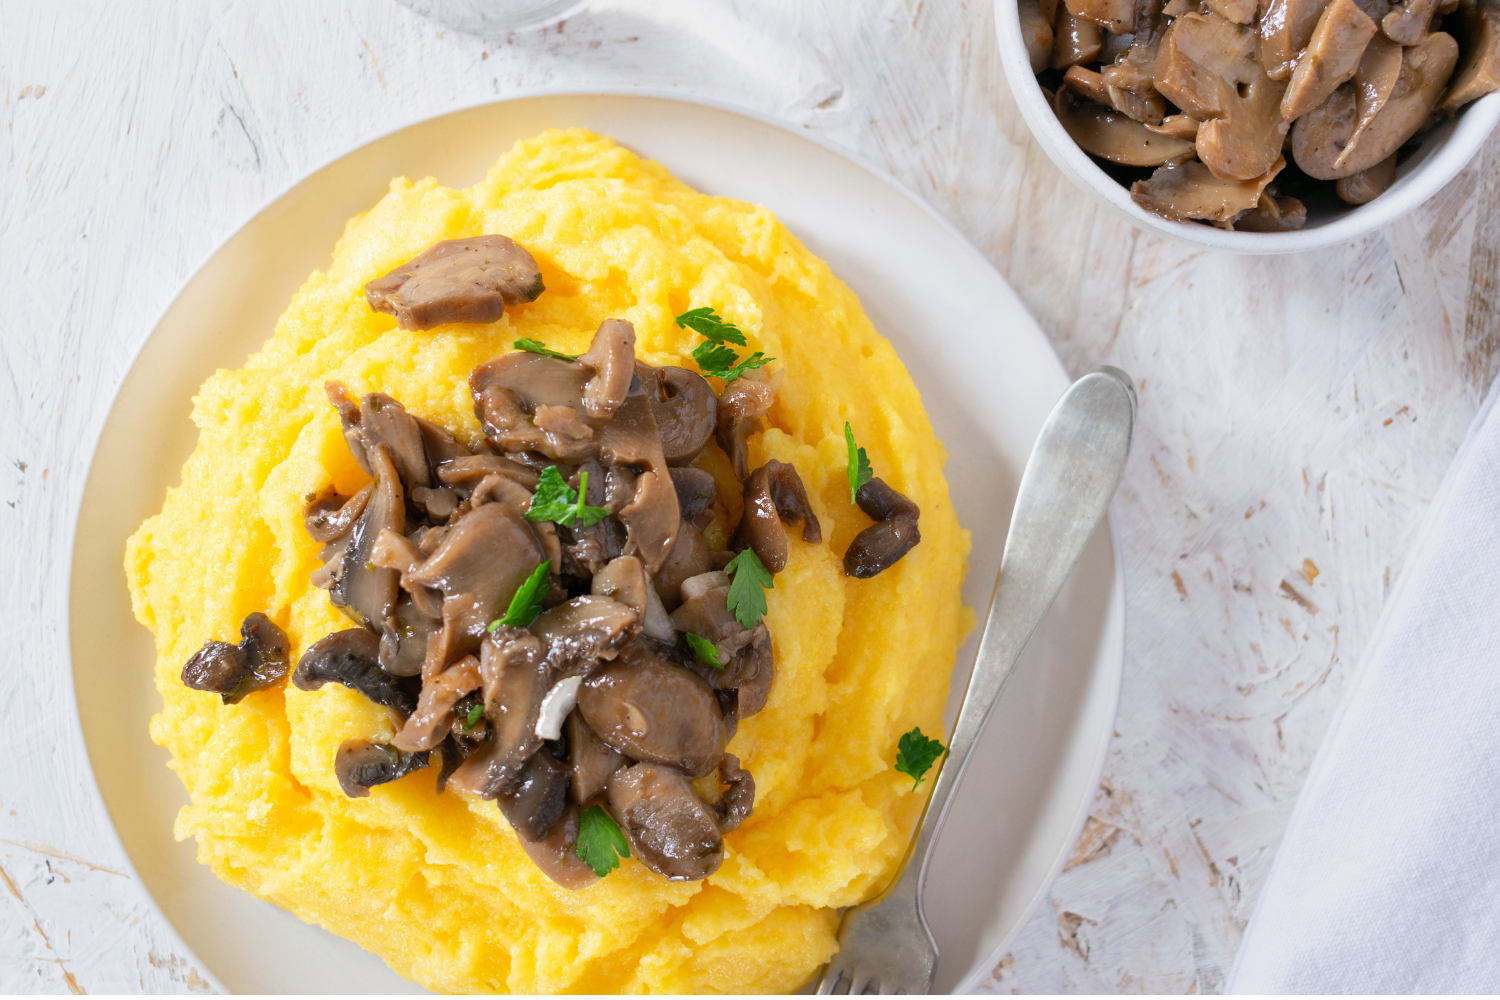 Woodcutter’s Polenta and Mushrooms